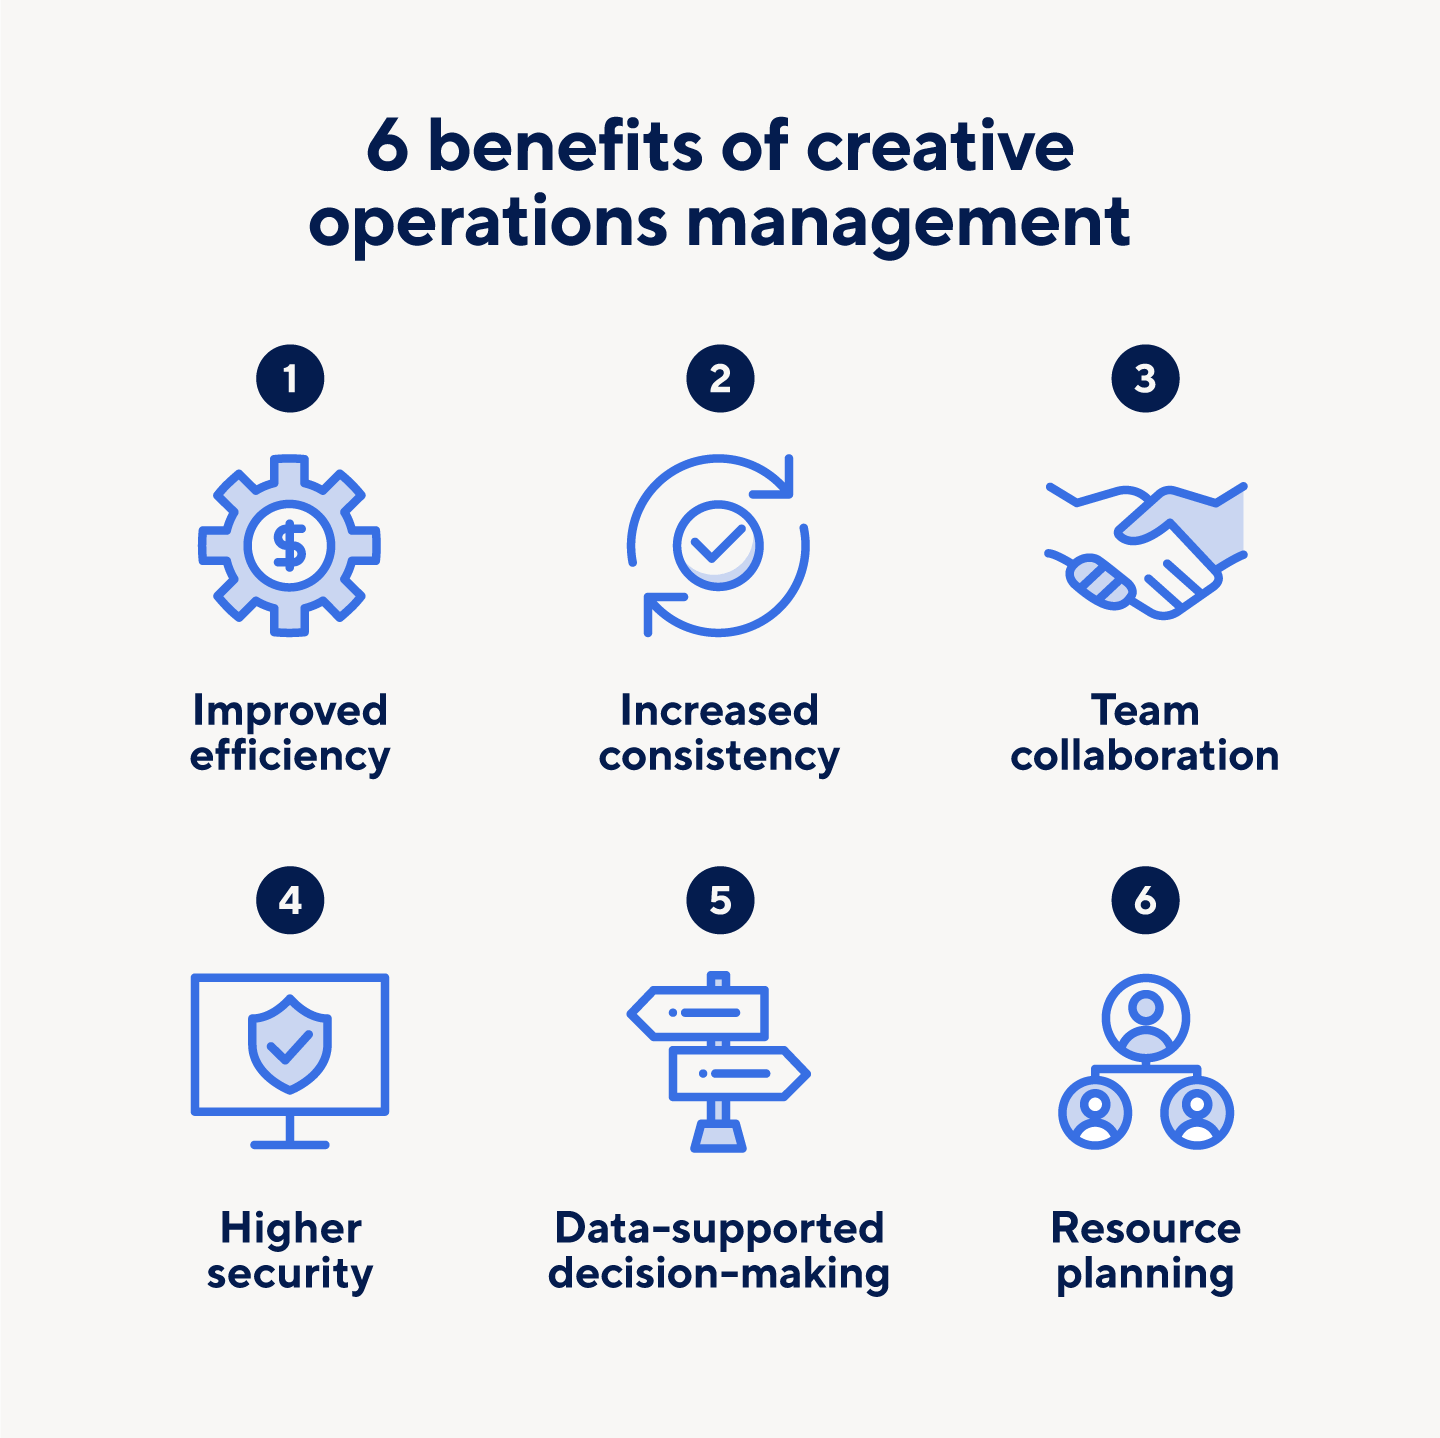 Collaboration and consistency are some of the benefits of creative operations management.